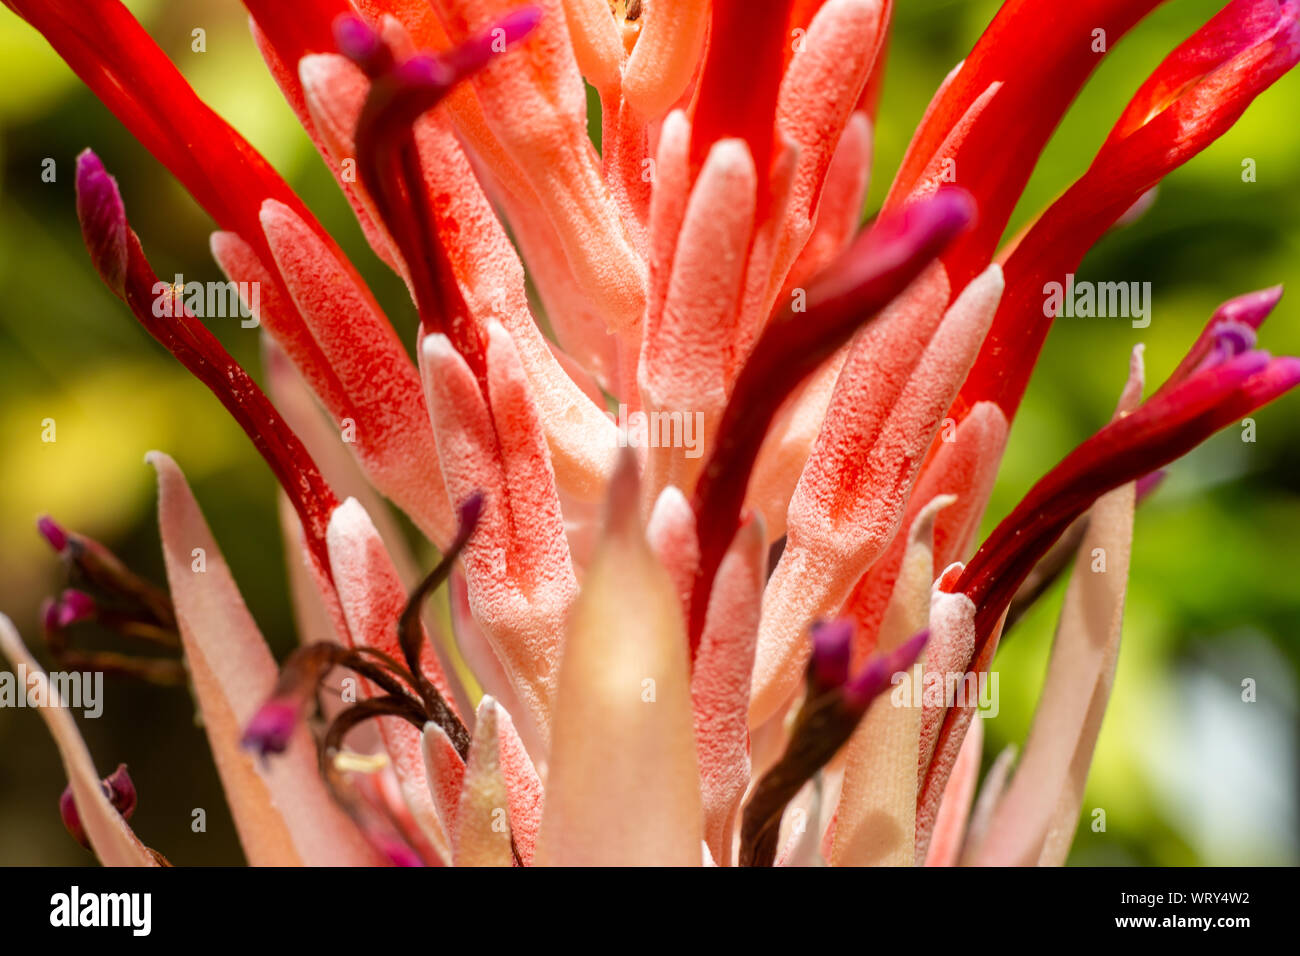 Bromeliad flower blooming in blurred garden, Close up and Marco shot Stock Photo